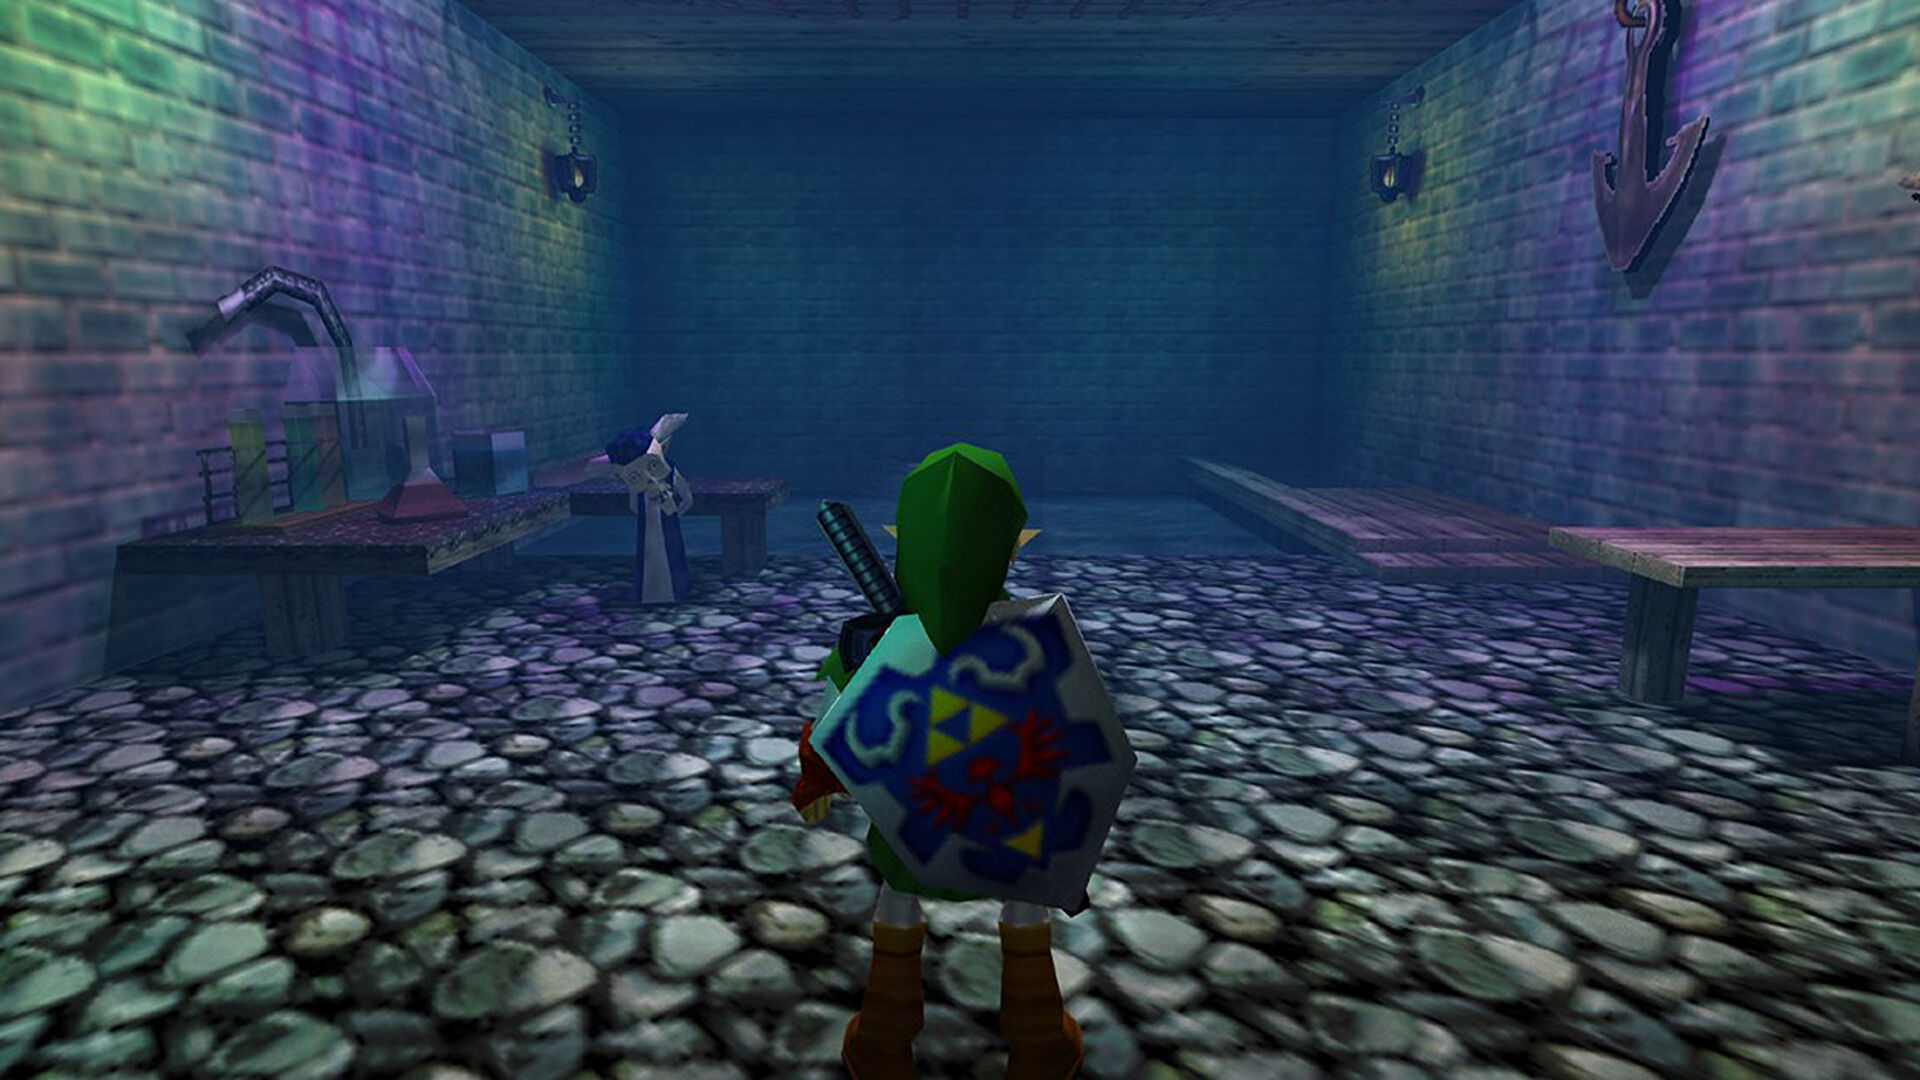 Legend of Zelda: Ocarina of Time PC Port - How To Install HD